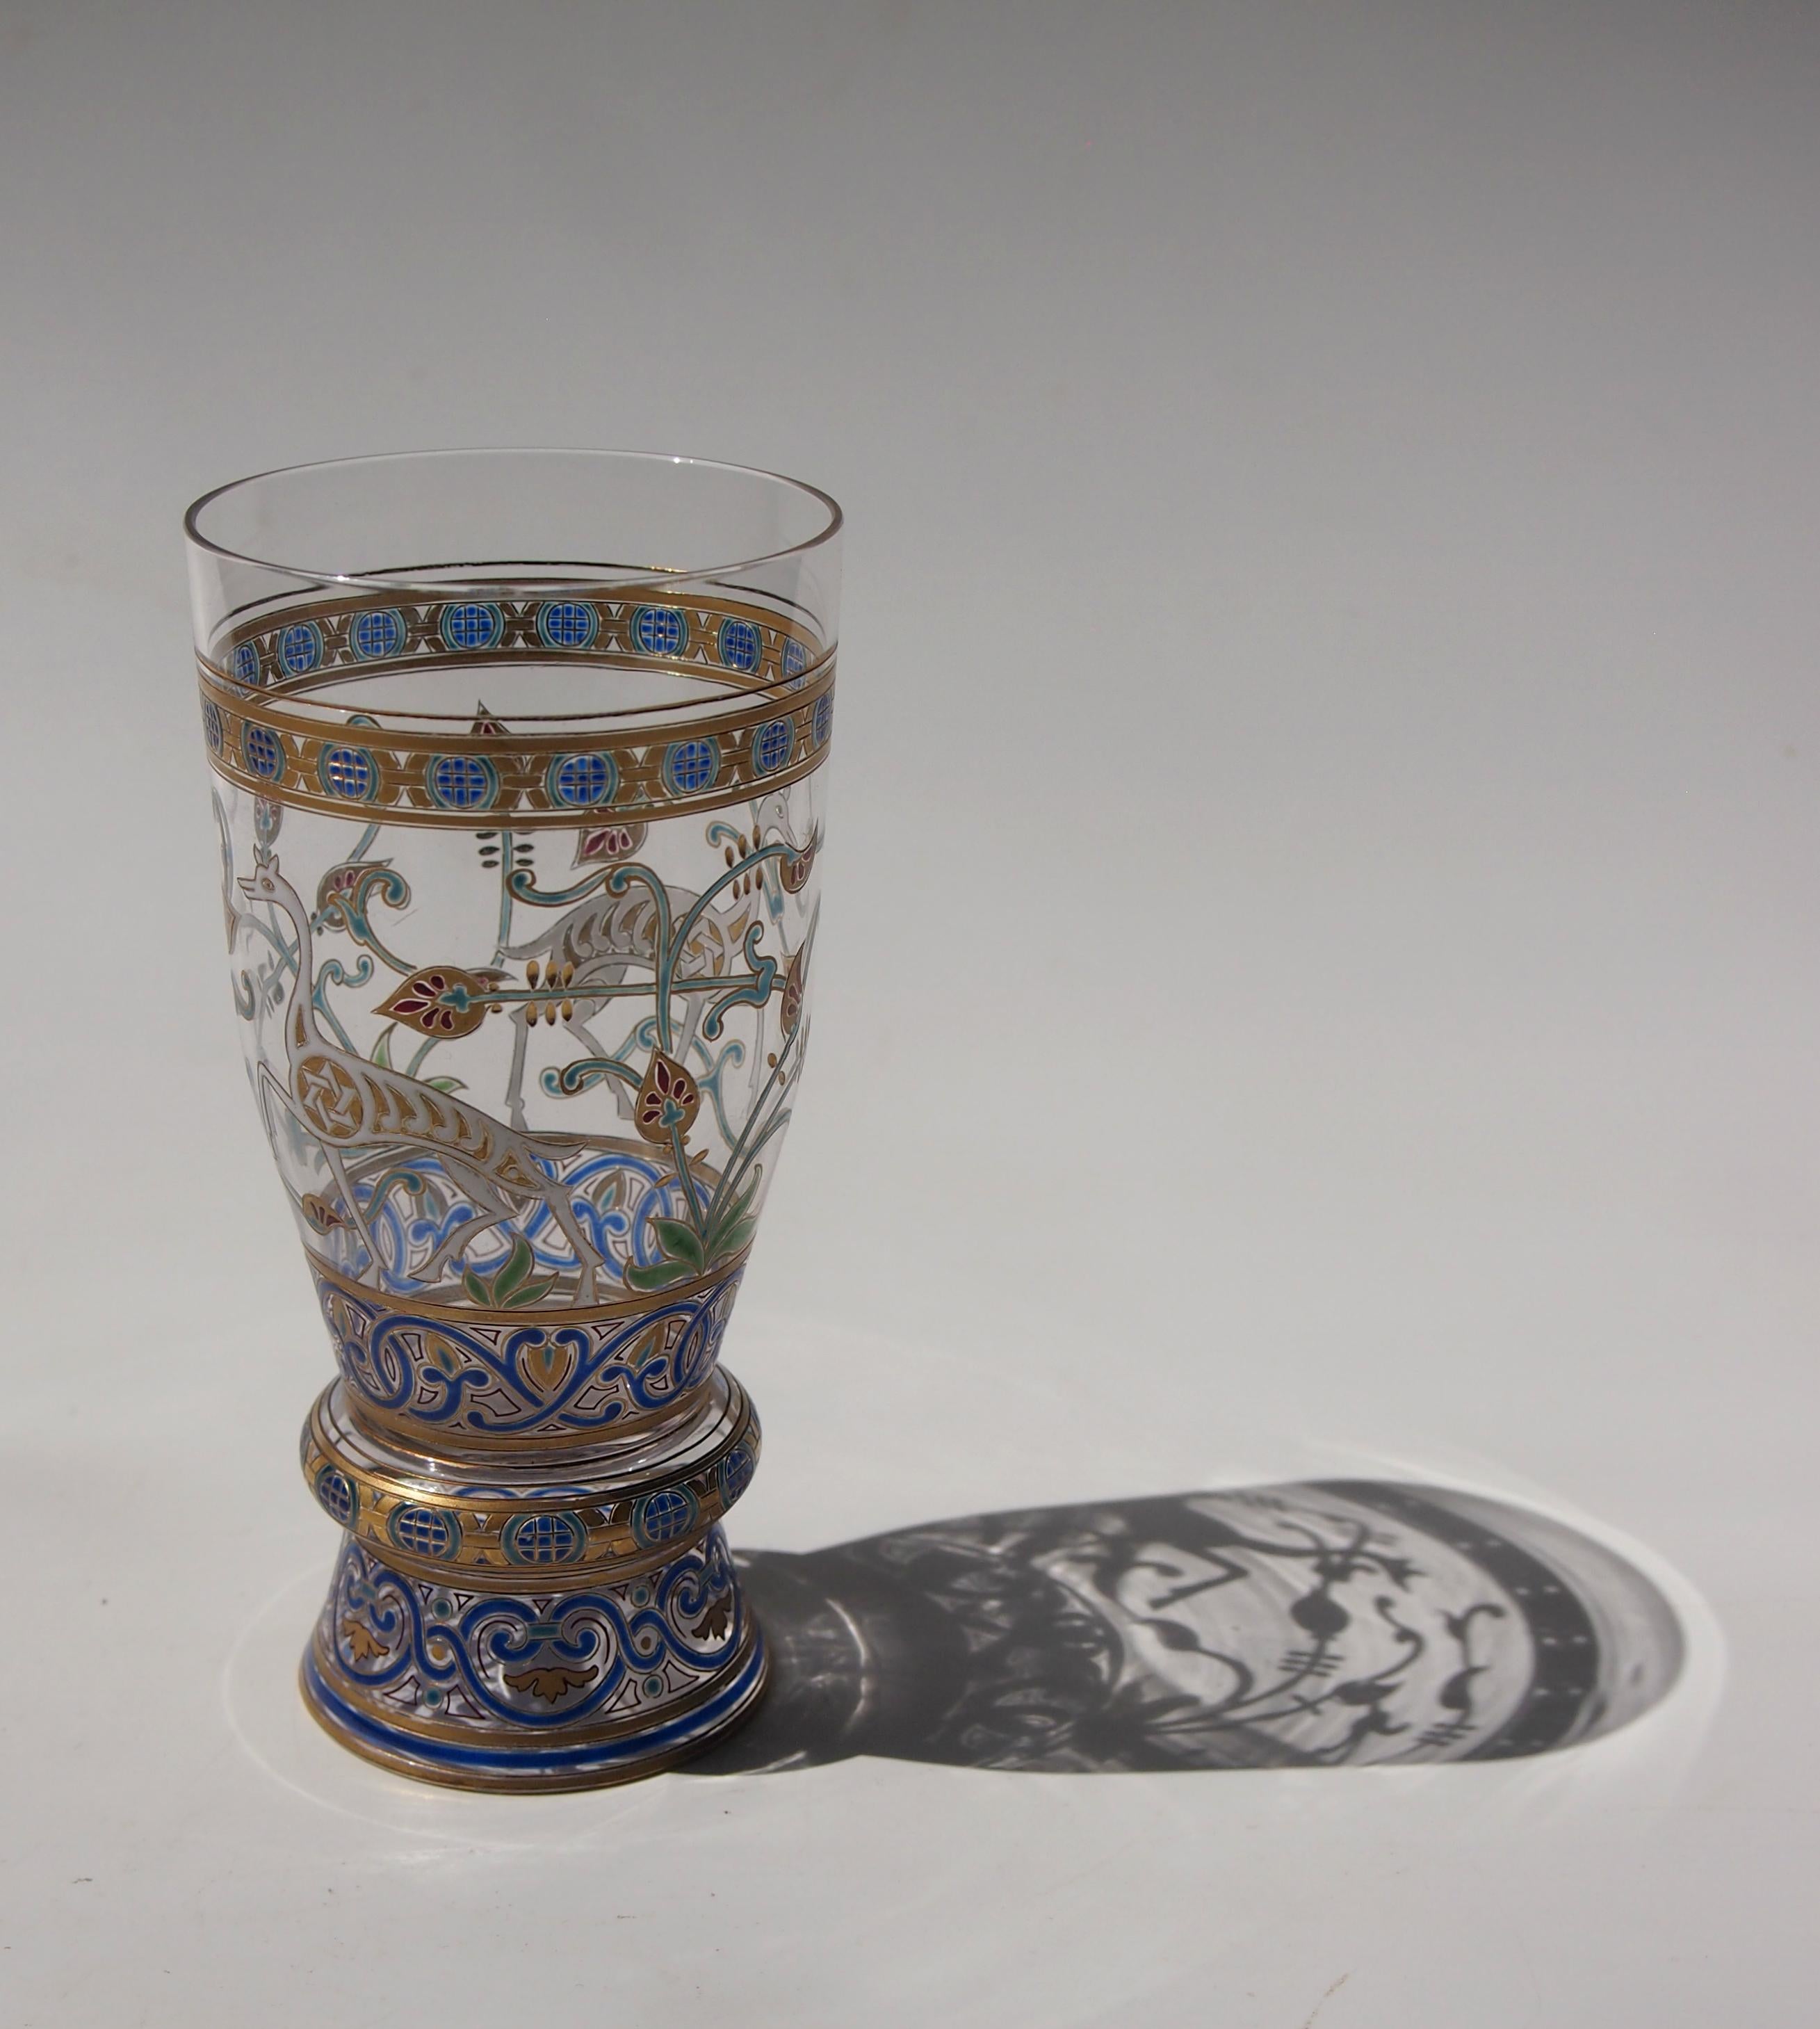 An Important signed gilt and enamelled Islamic glass goblet by J & L Lobmeyr circa 1870 depicting Islamic calligraphy, stylised decoration and 'deer' with the star of David. It is enamelled in blue, white, green, red and gold and signed in gold (see